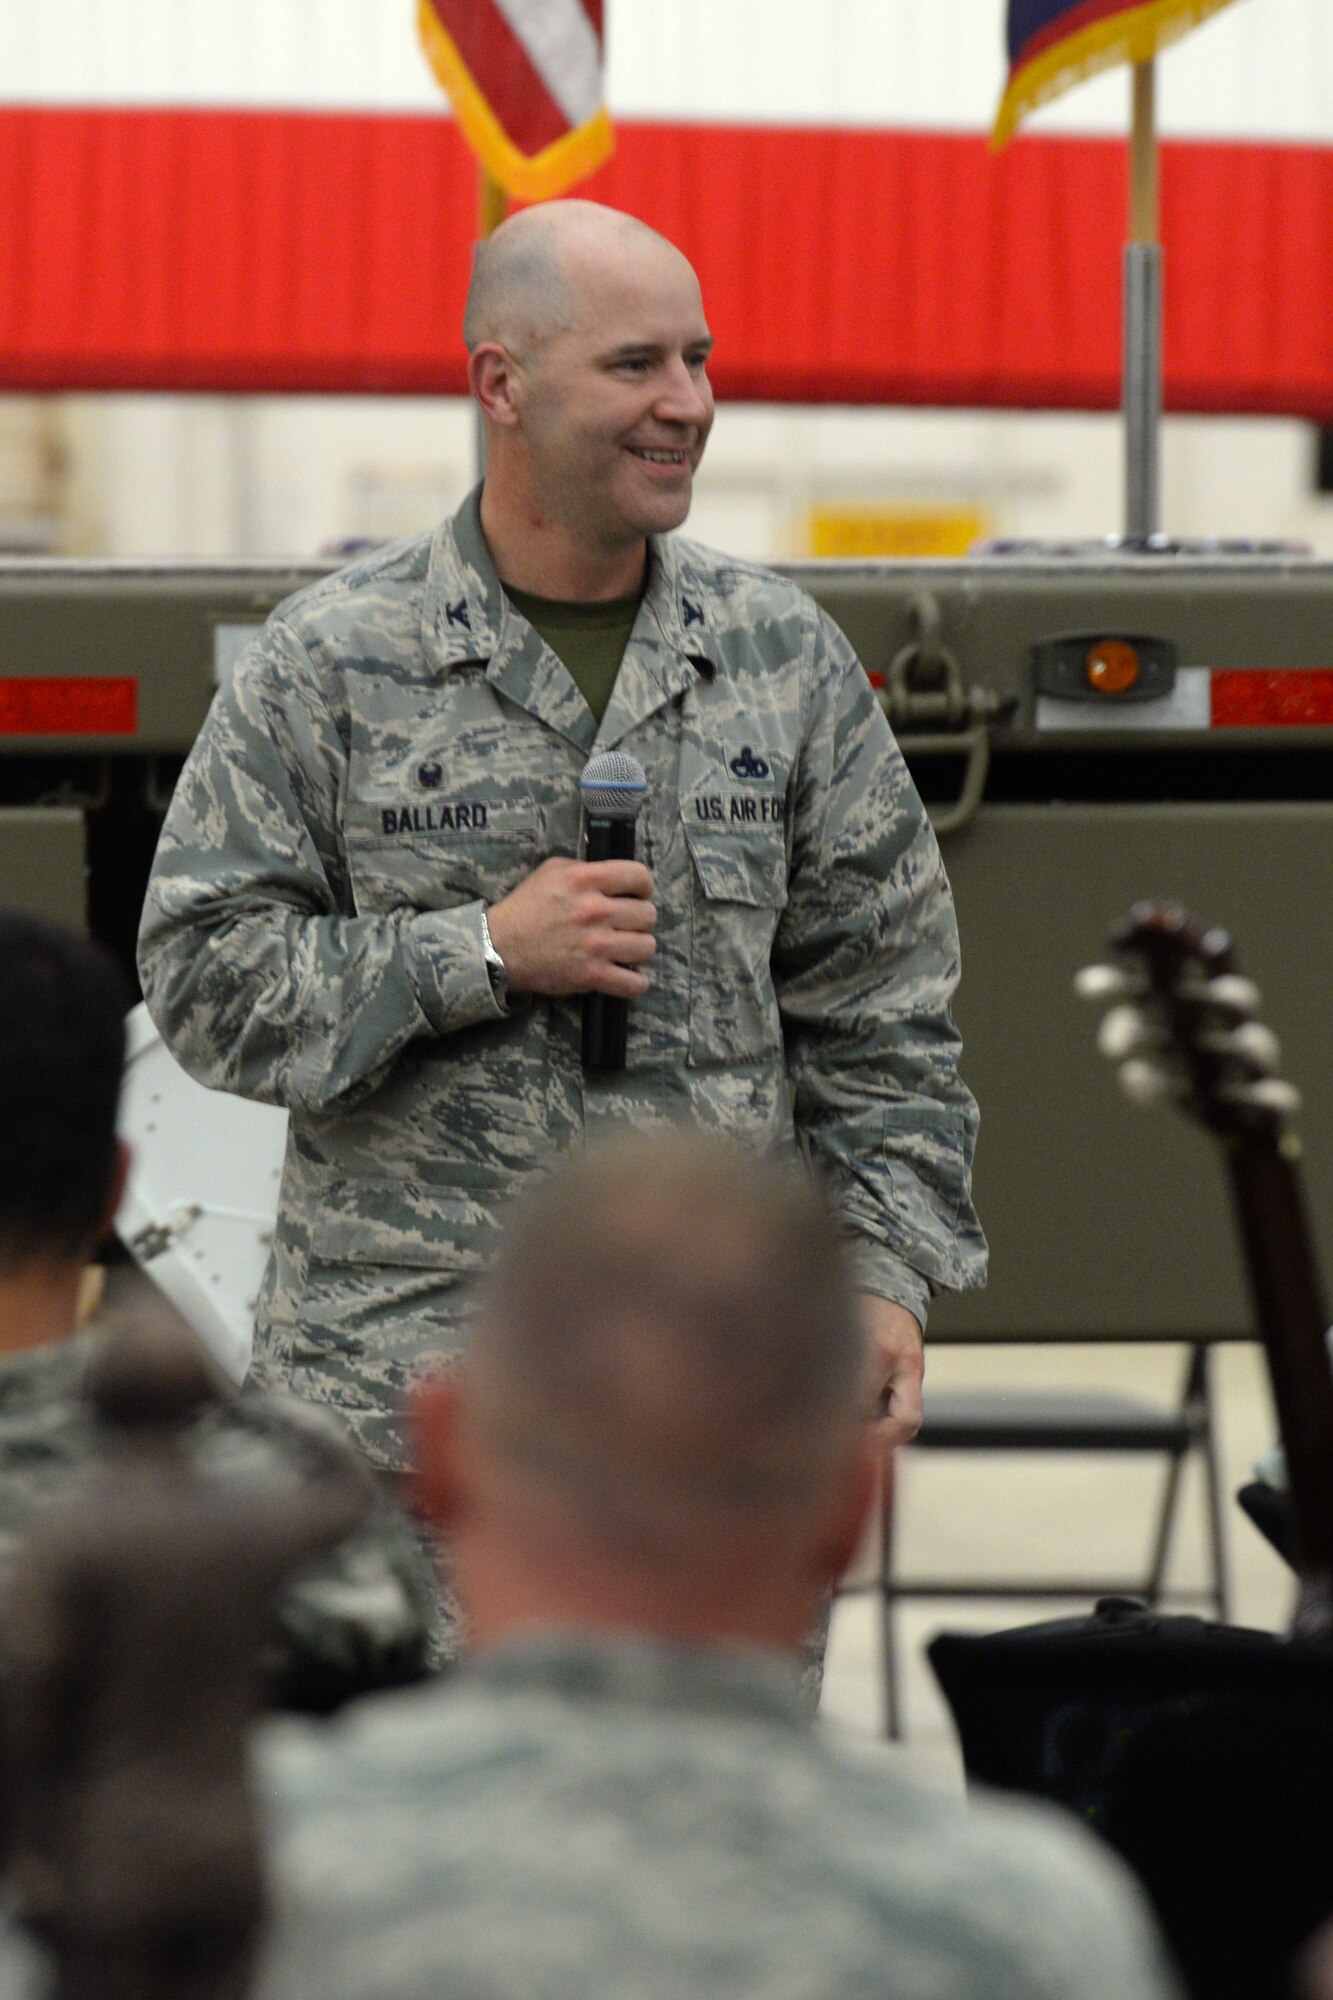 Col. Patrick Ballard, 36th Maintenance Group Commander, speaks at the Maintenance Professional of the Year award ceremony March 4, 2016, at Andersen Air Force Base, Guam. More than 100 people attended the ceremony and watched more than 20 Airmen win awards for outstanding achievements. (U.S. Air Force photo/Airman 1st Class Alexa Ann Henderson)